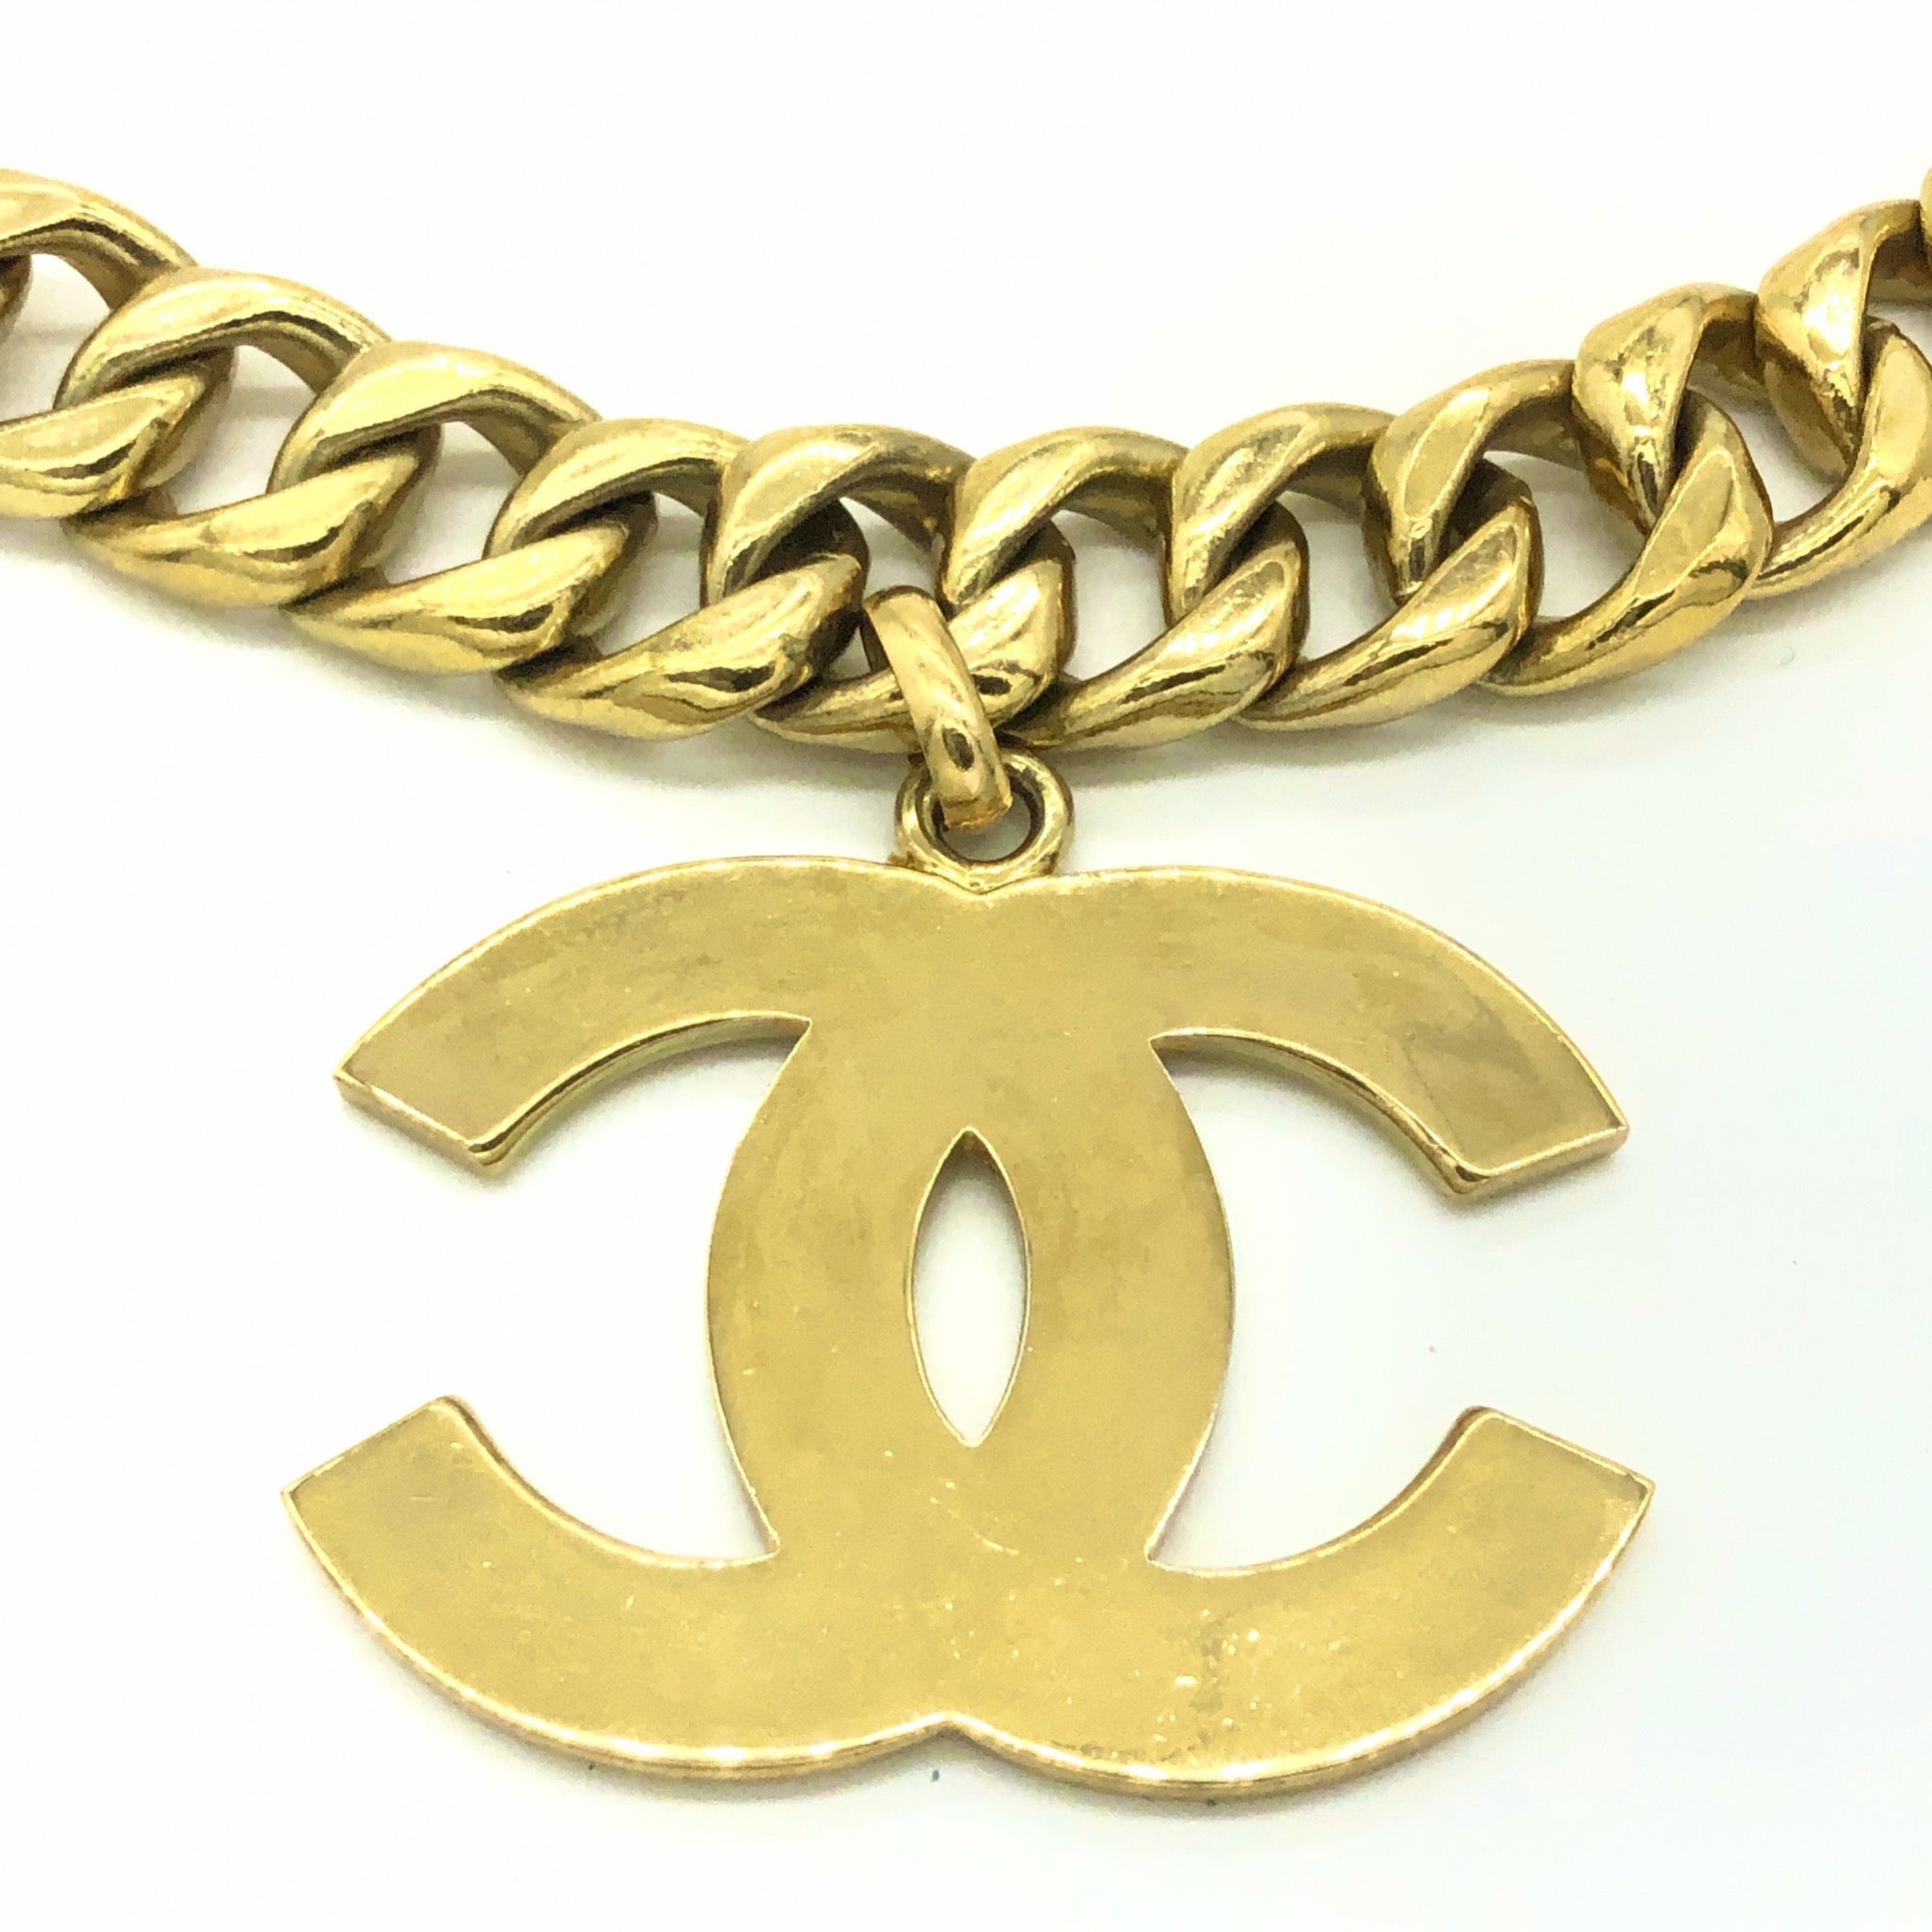 CHANEL, Jewelry, Chanel 2a Gold Large Cc Logo Necklace